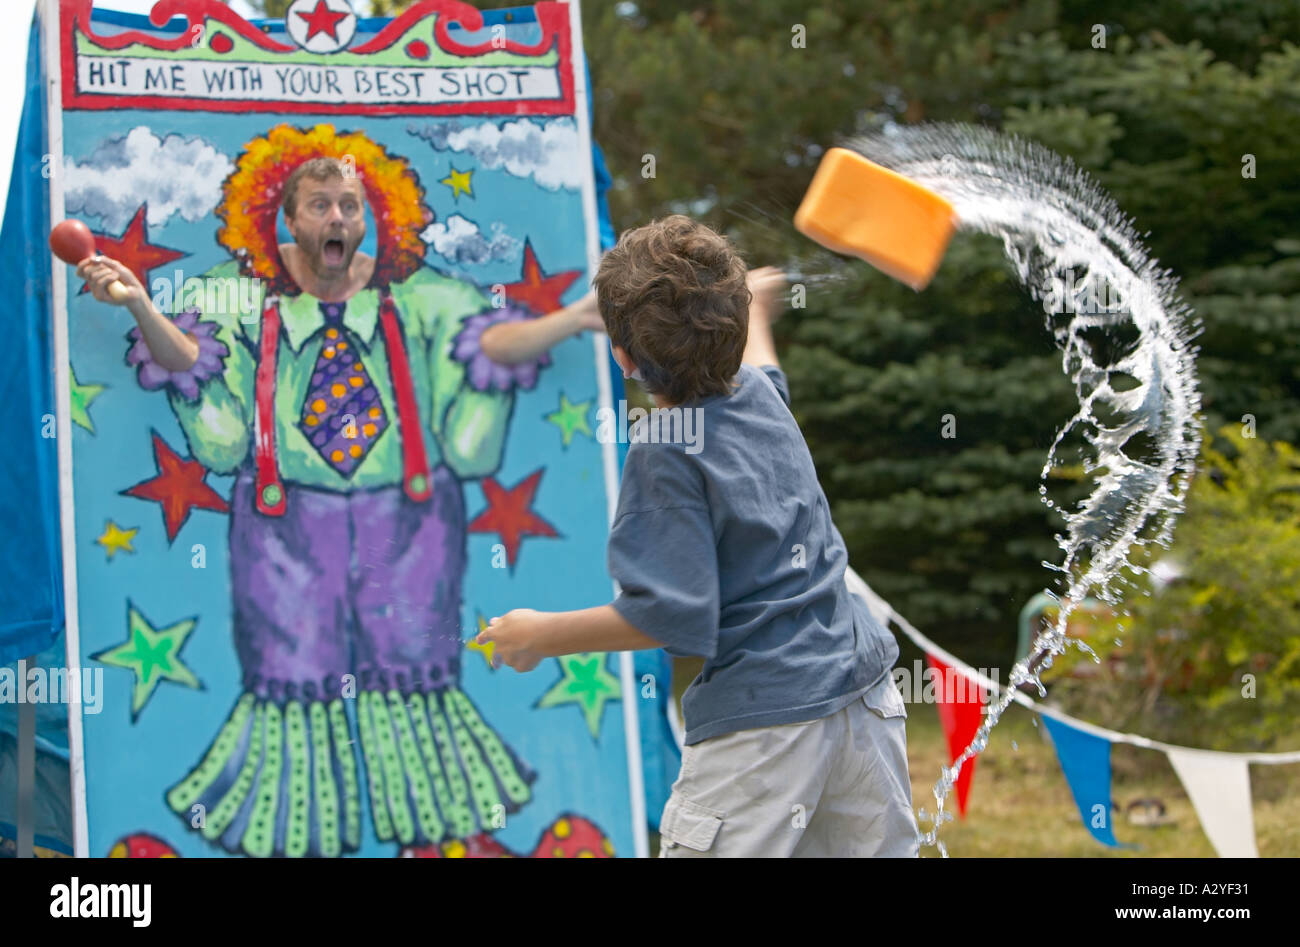 Caucasian 5 year old boy throws wet sponge at man at small town 4th of july festival Stock Photo